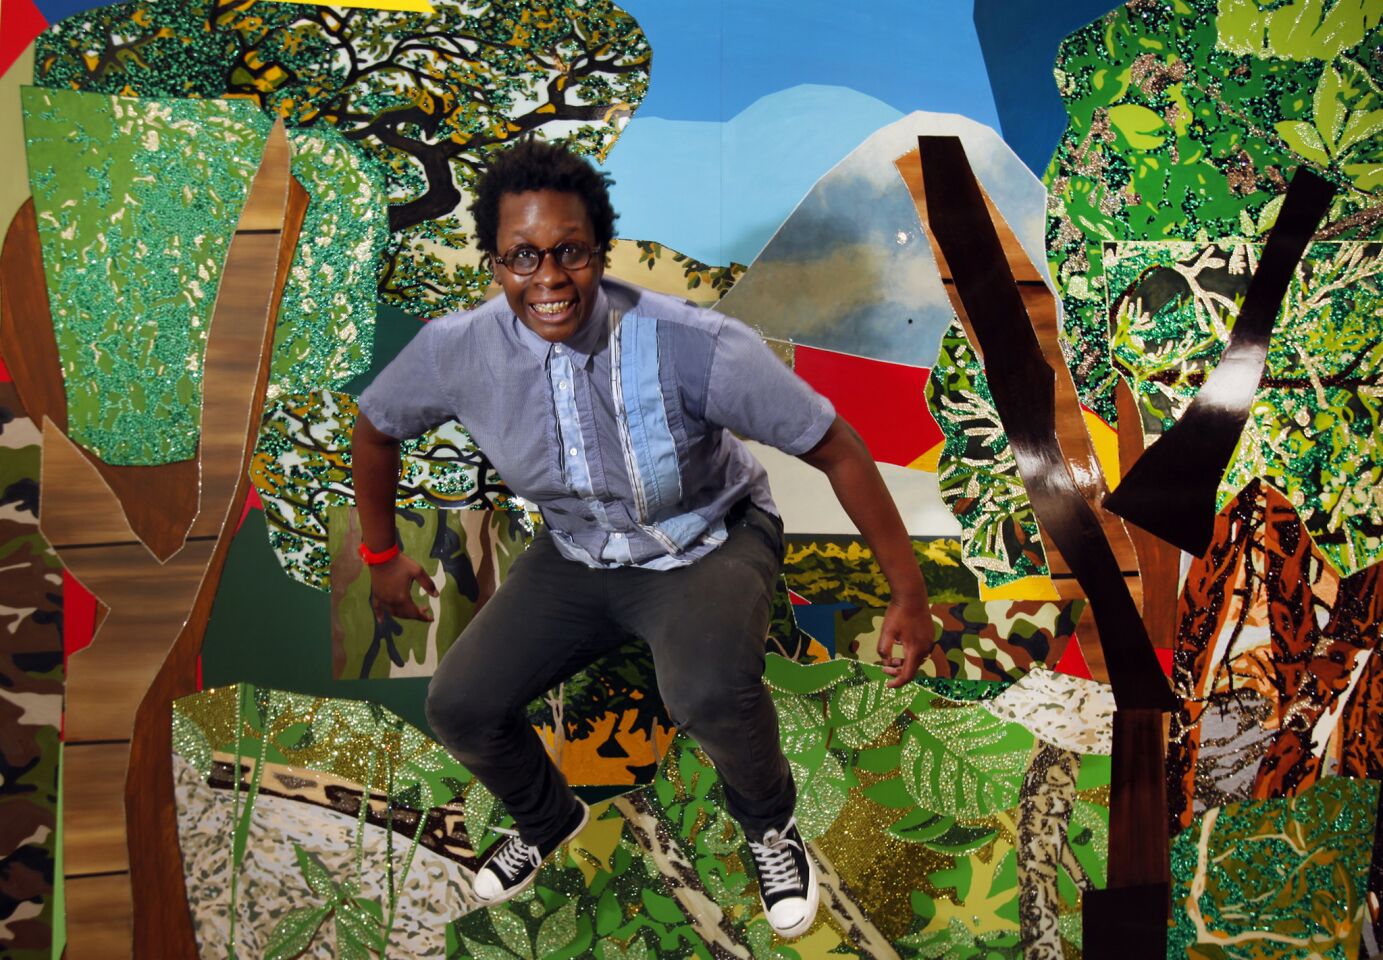 New York-based artist Mickalene Thomas -- best known for her elaborate paintings adorned with rhinestones, enamel and colorful acrylics -- works to finish the installation of her latest show at the Santa Monica Museum of Art in Bergamot Station on April 4, 2012. MORE: Mickalene Thomas, up close and very personal